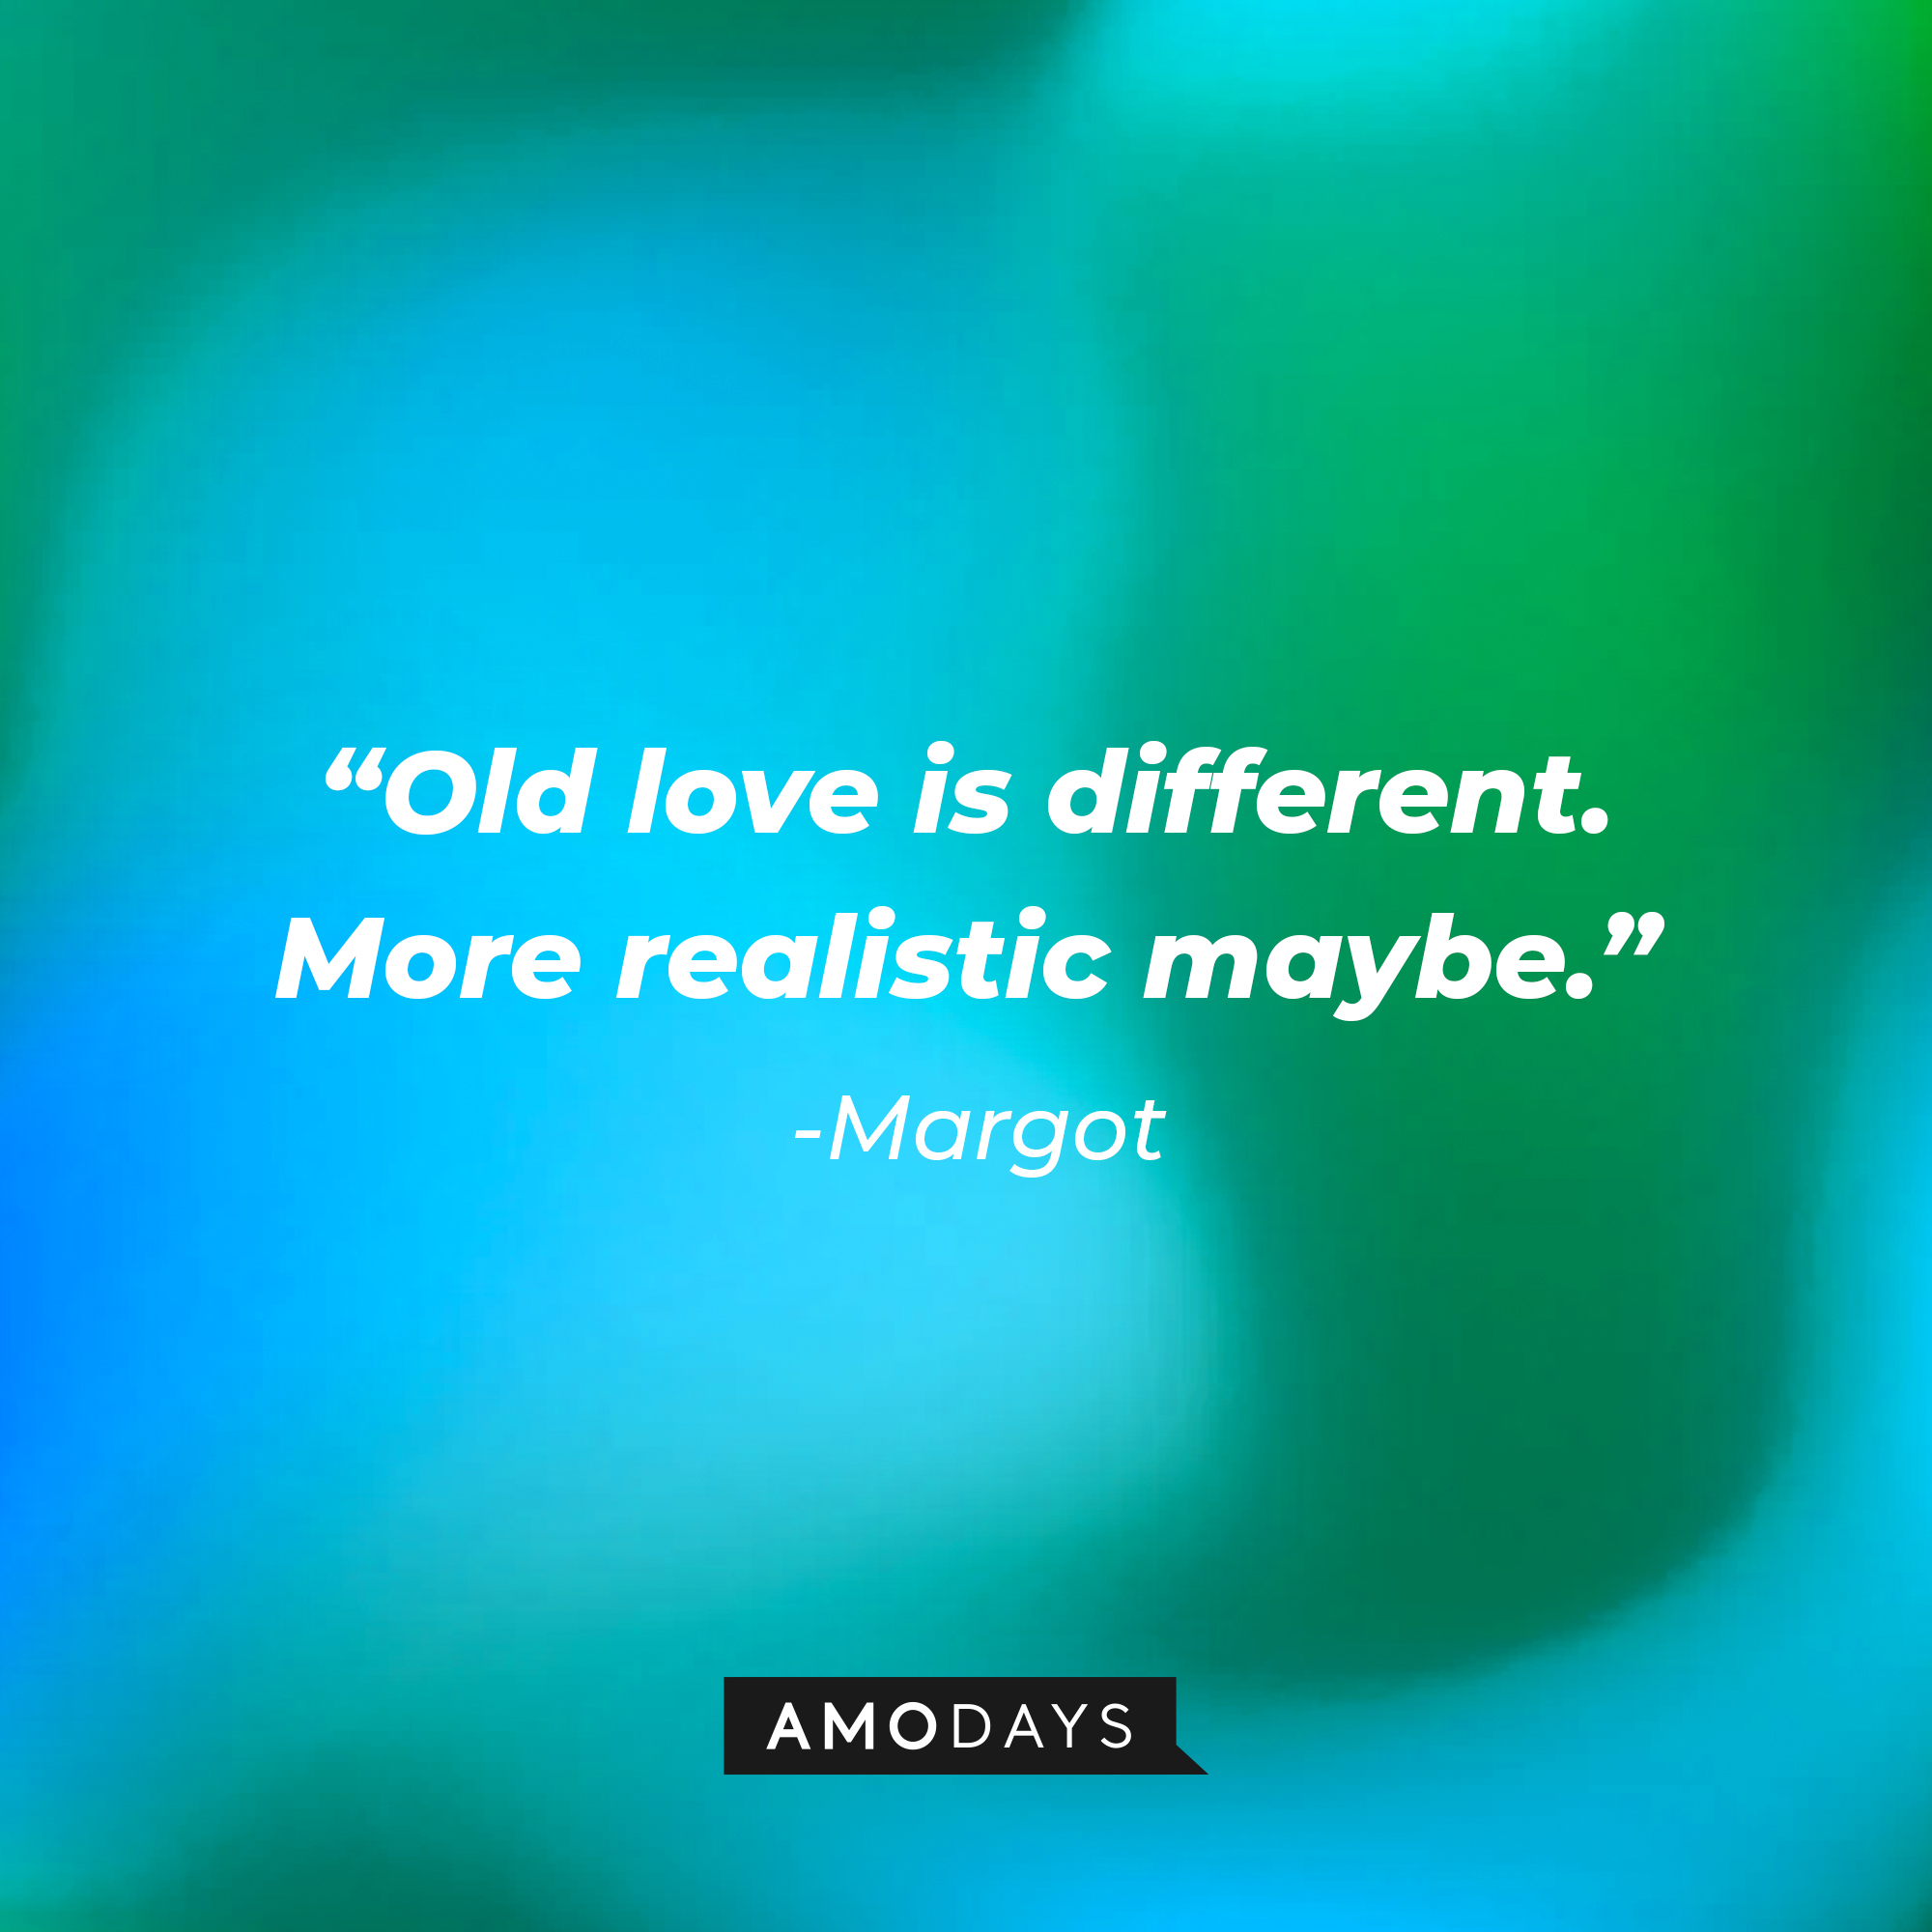 Margot’s quote from “Modern Love”: “Old love is different. More realistic maybe.”  | Source: AmoDays